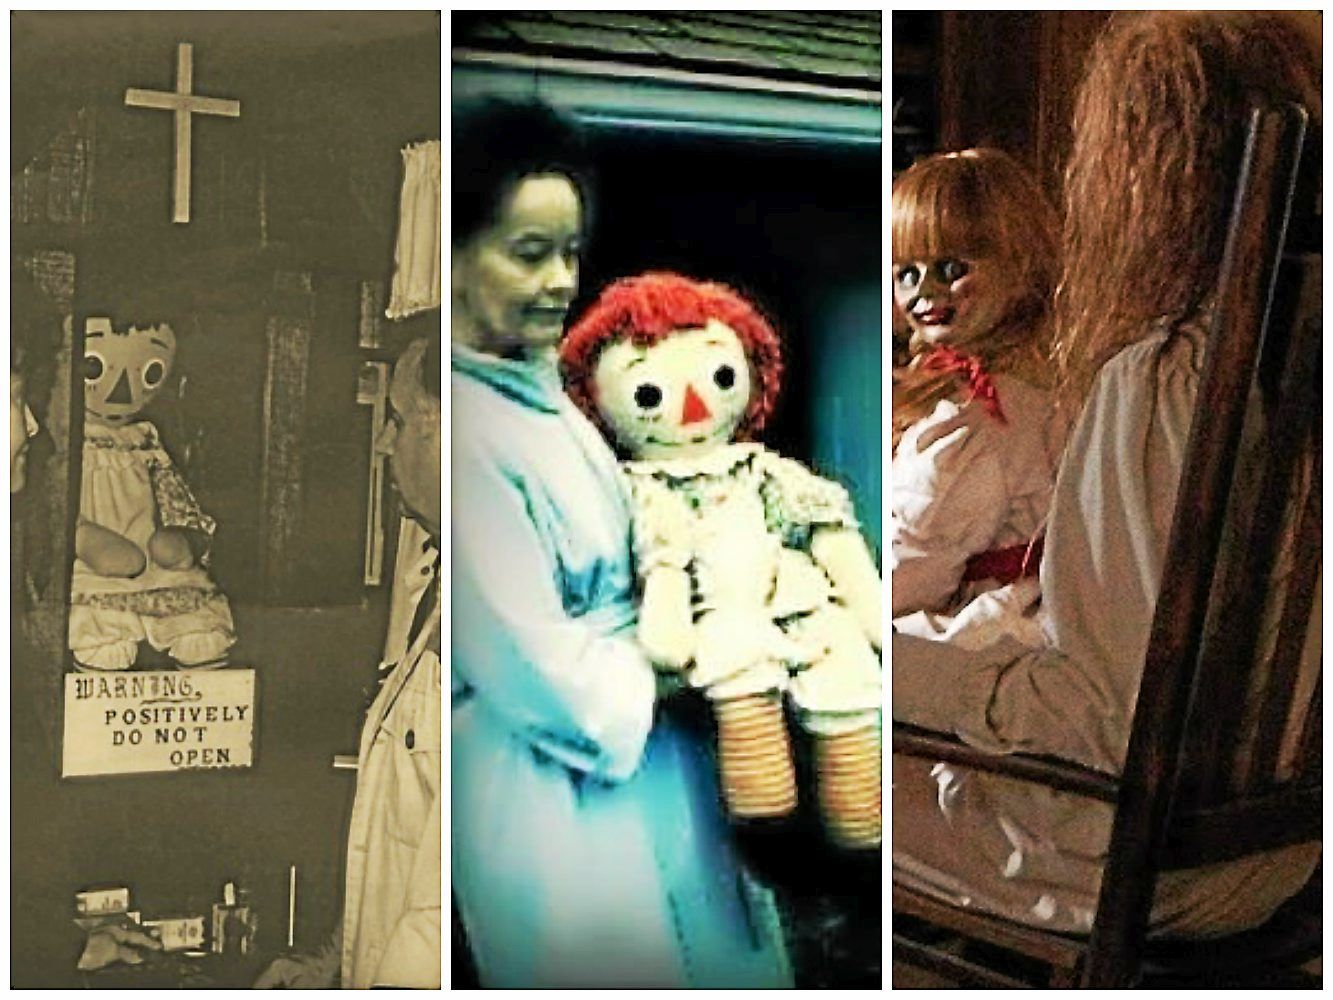 Real 'Annabelle' story shared by Lorraine Warren at Milford's ...